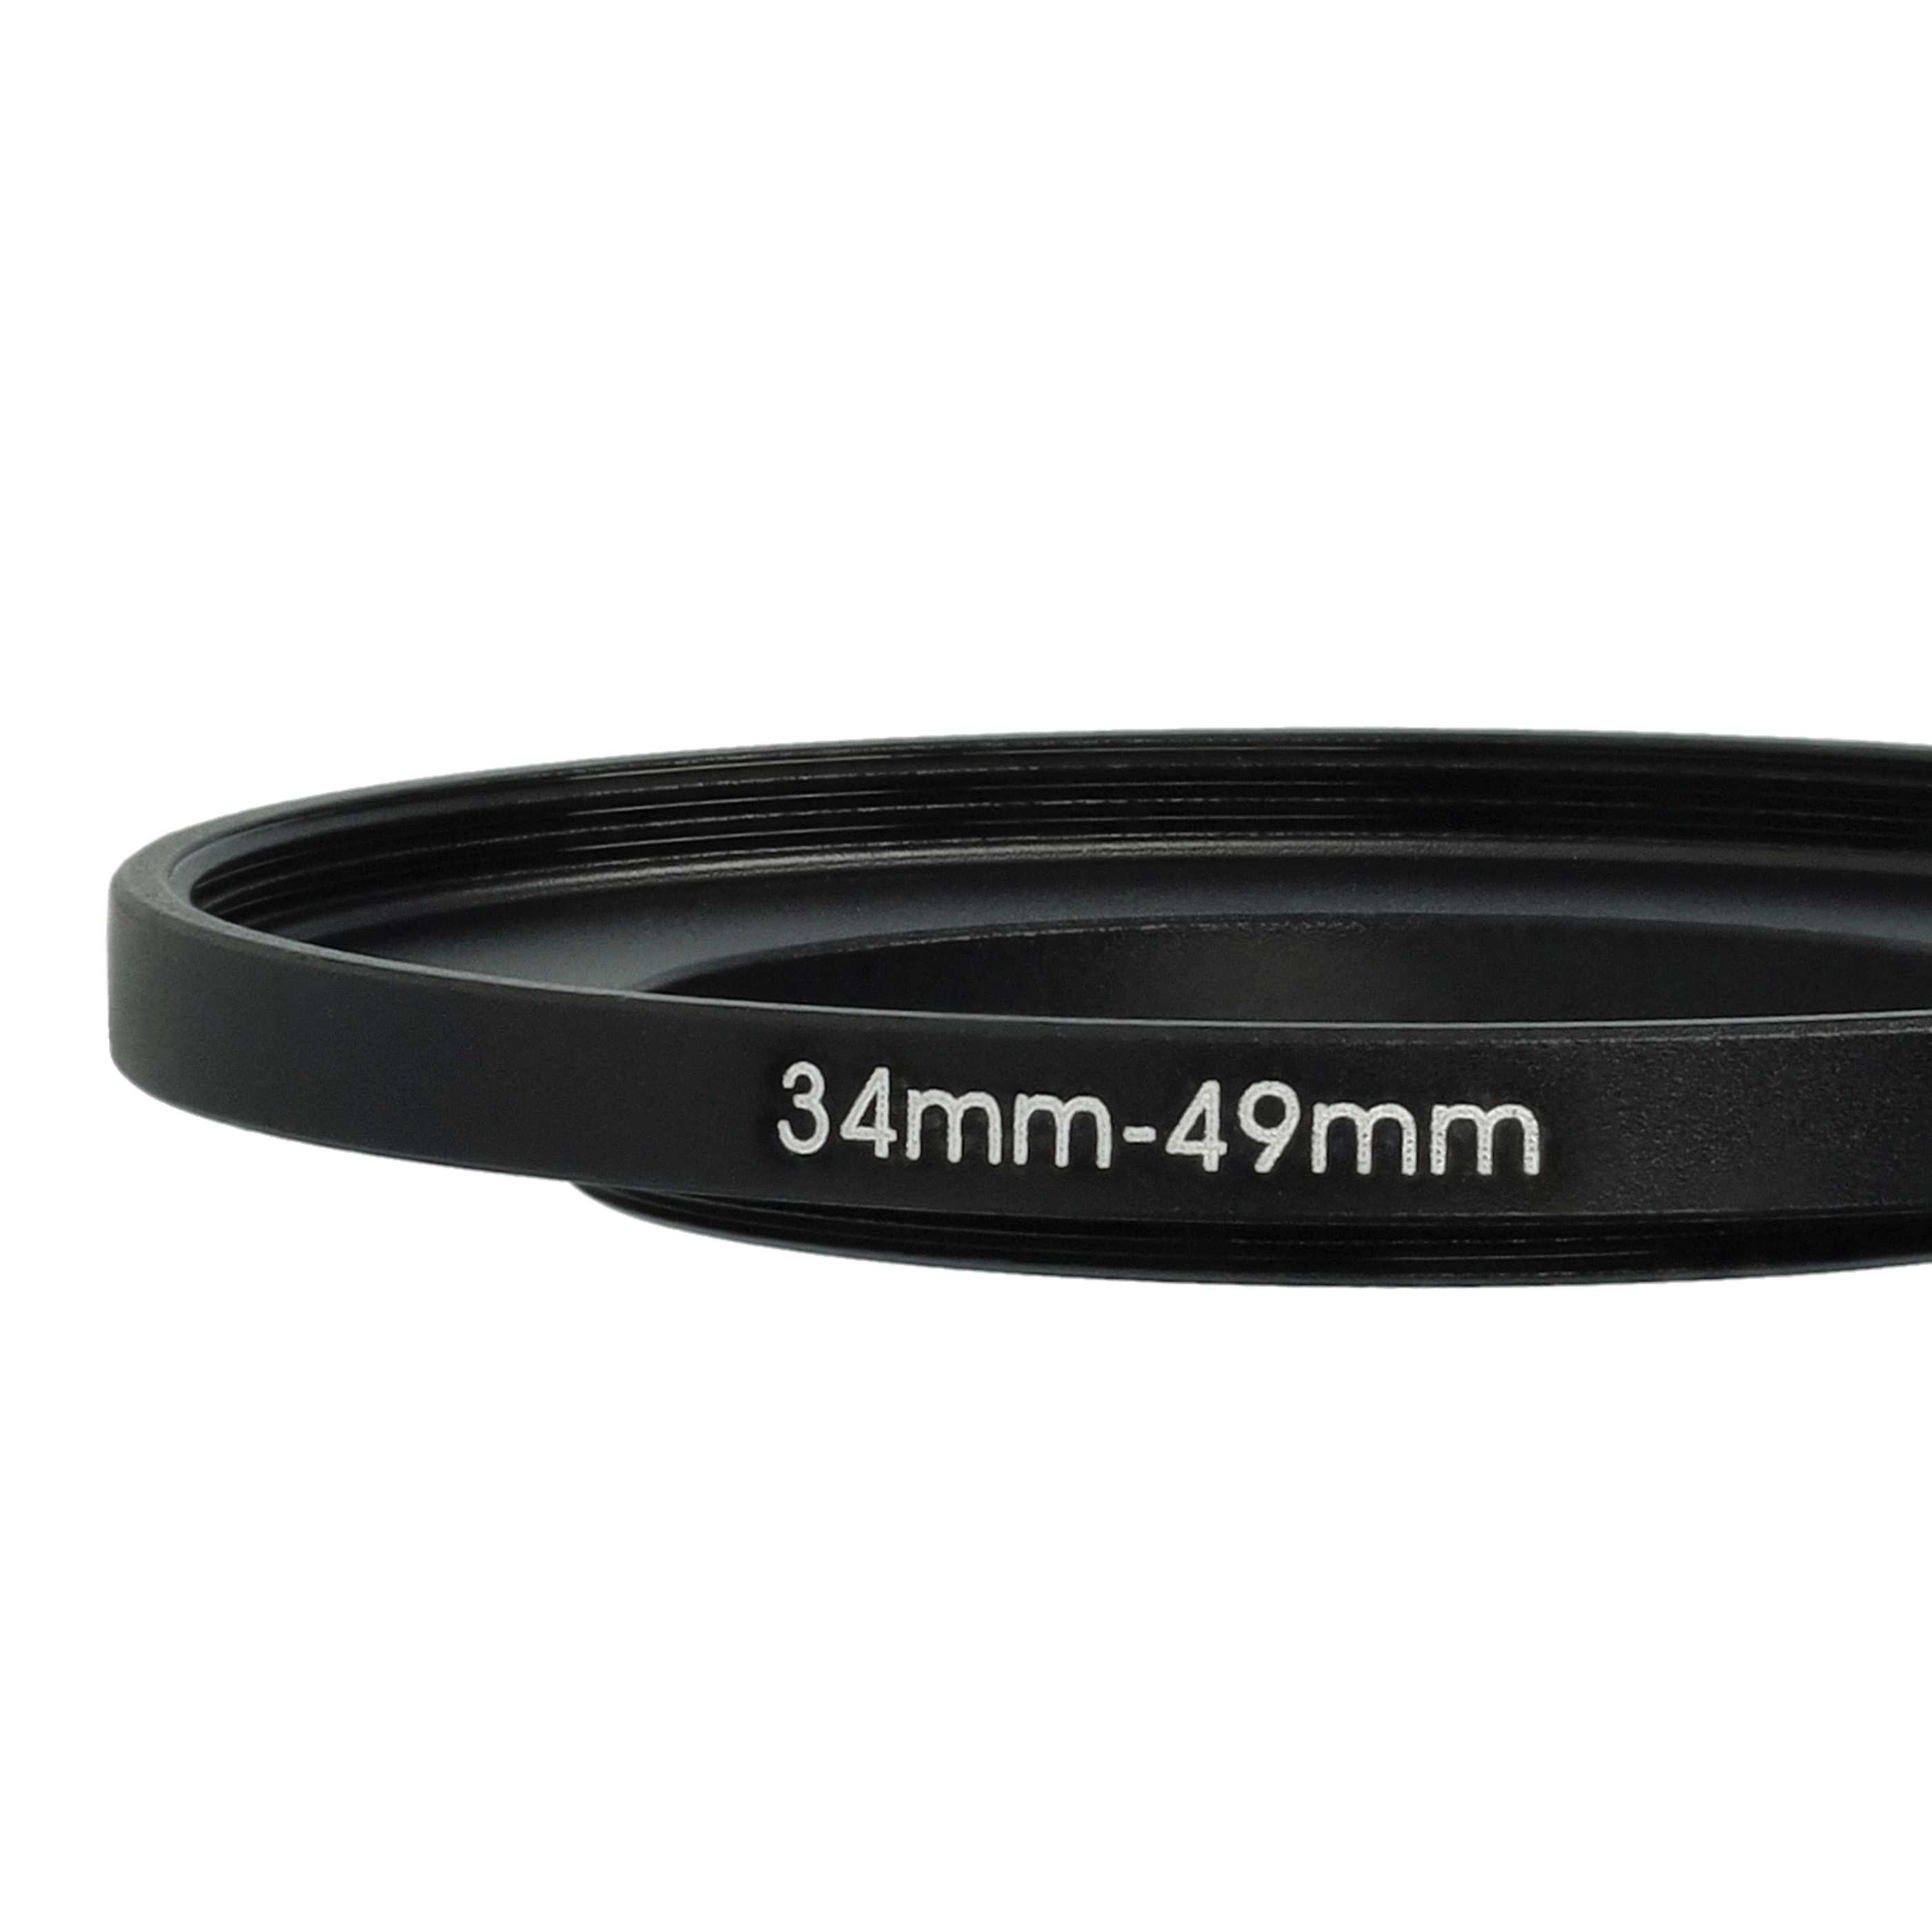 Step-Up Ring Adapter of 34 mm to 49 mmfor various Camera Lens - Filter Adapter